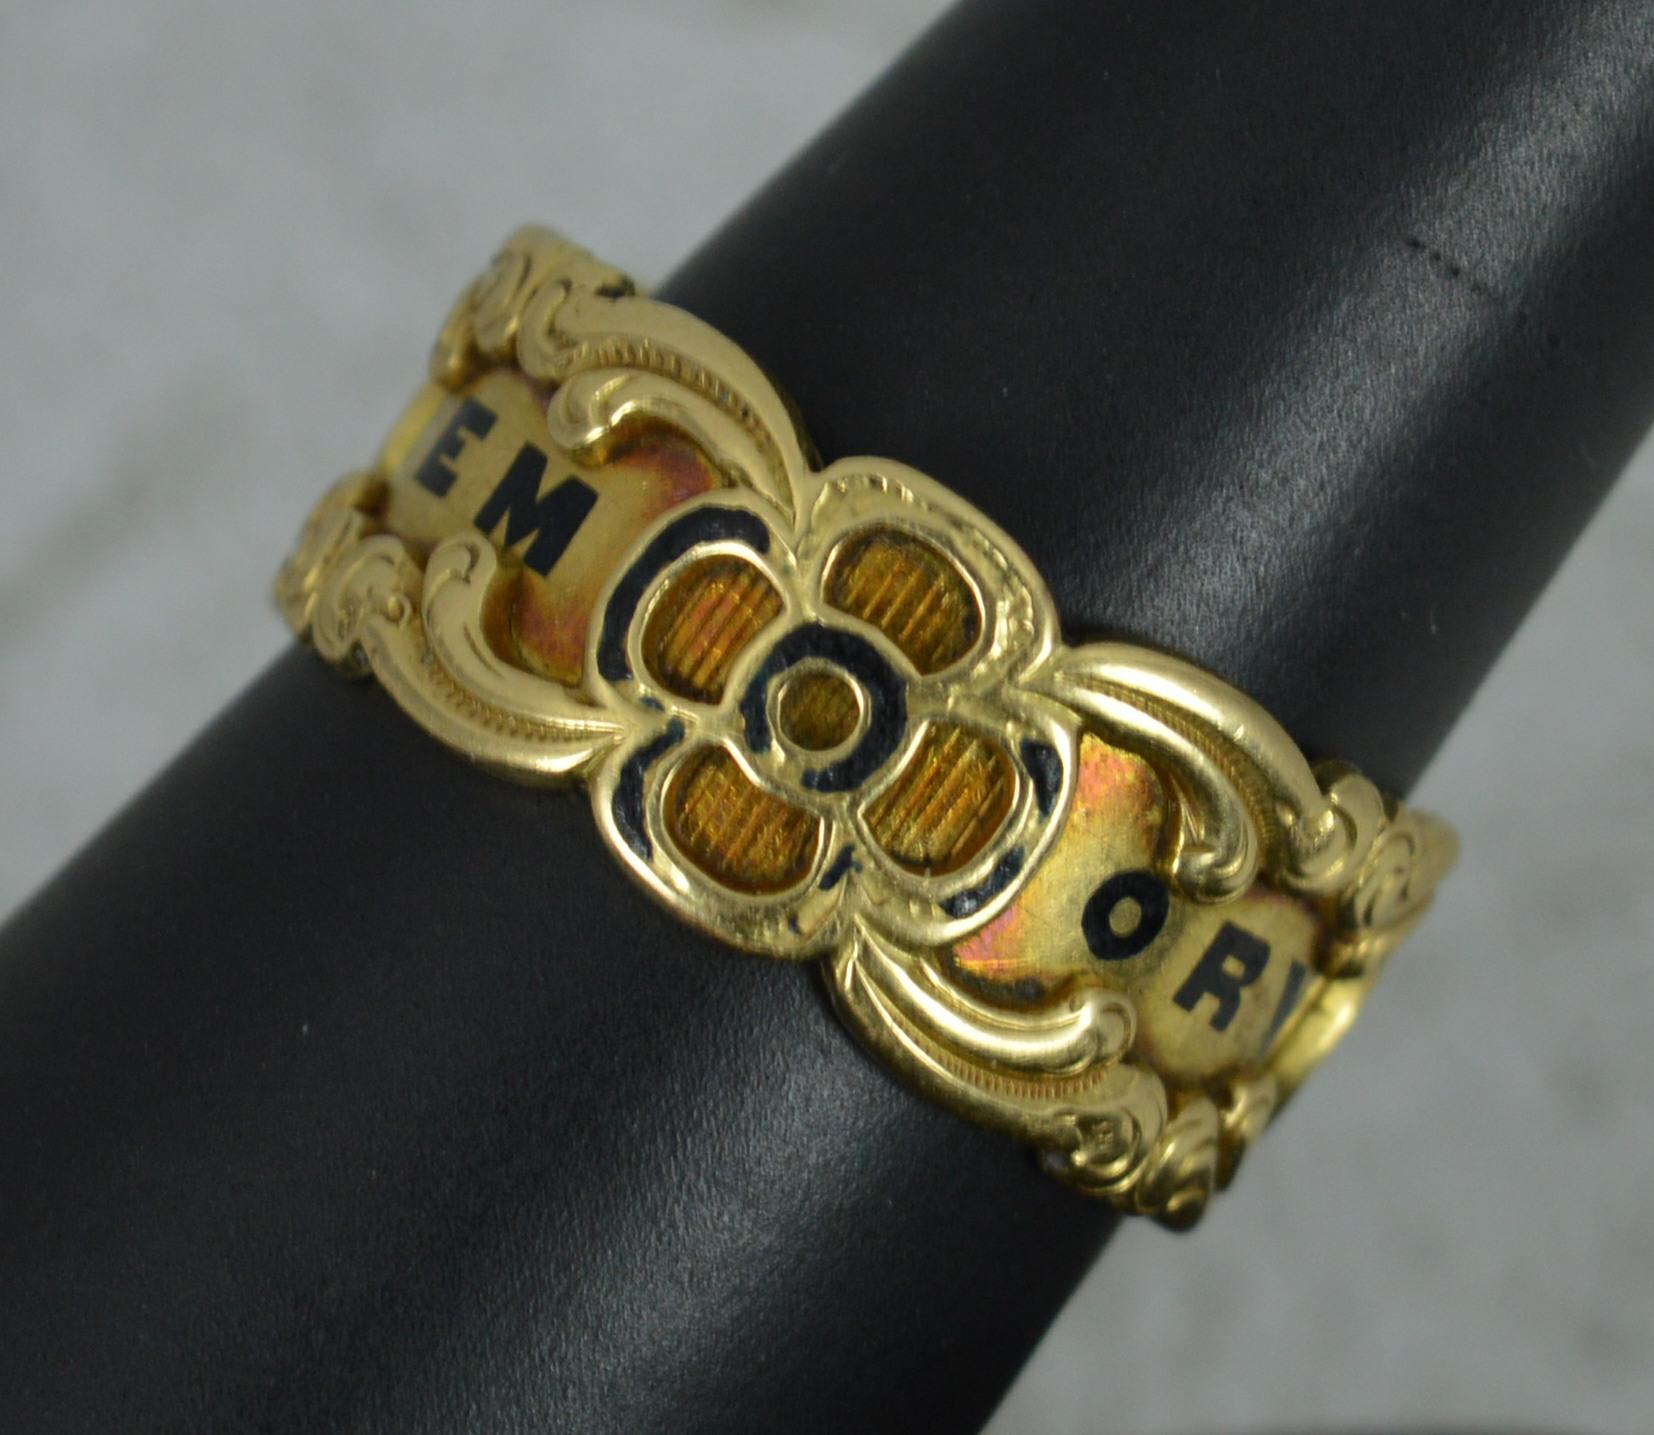 1842 Victorian 18 Carat Gold Enamel In Memory of Mourning Band Ring 8